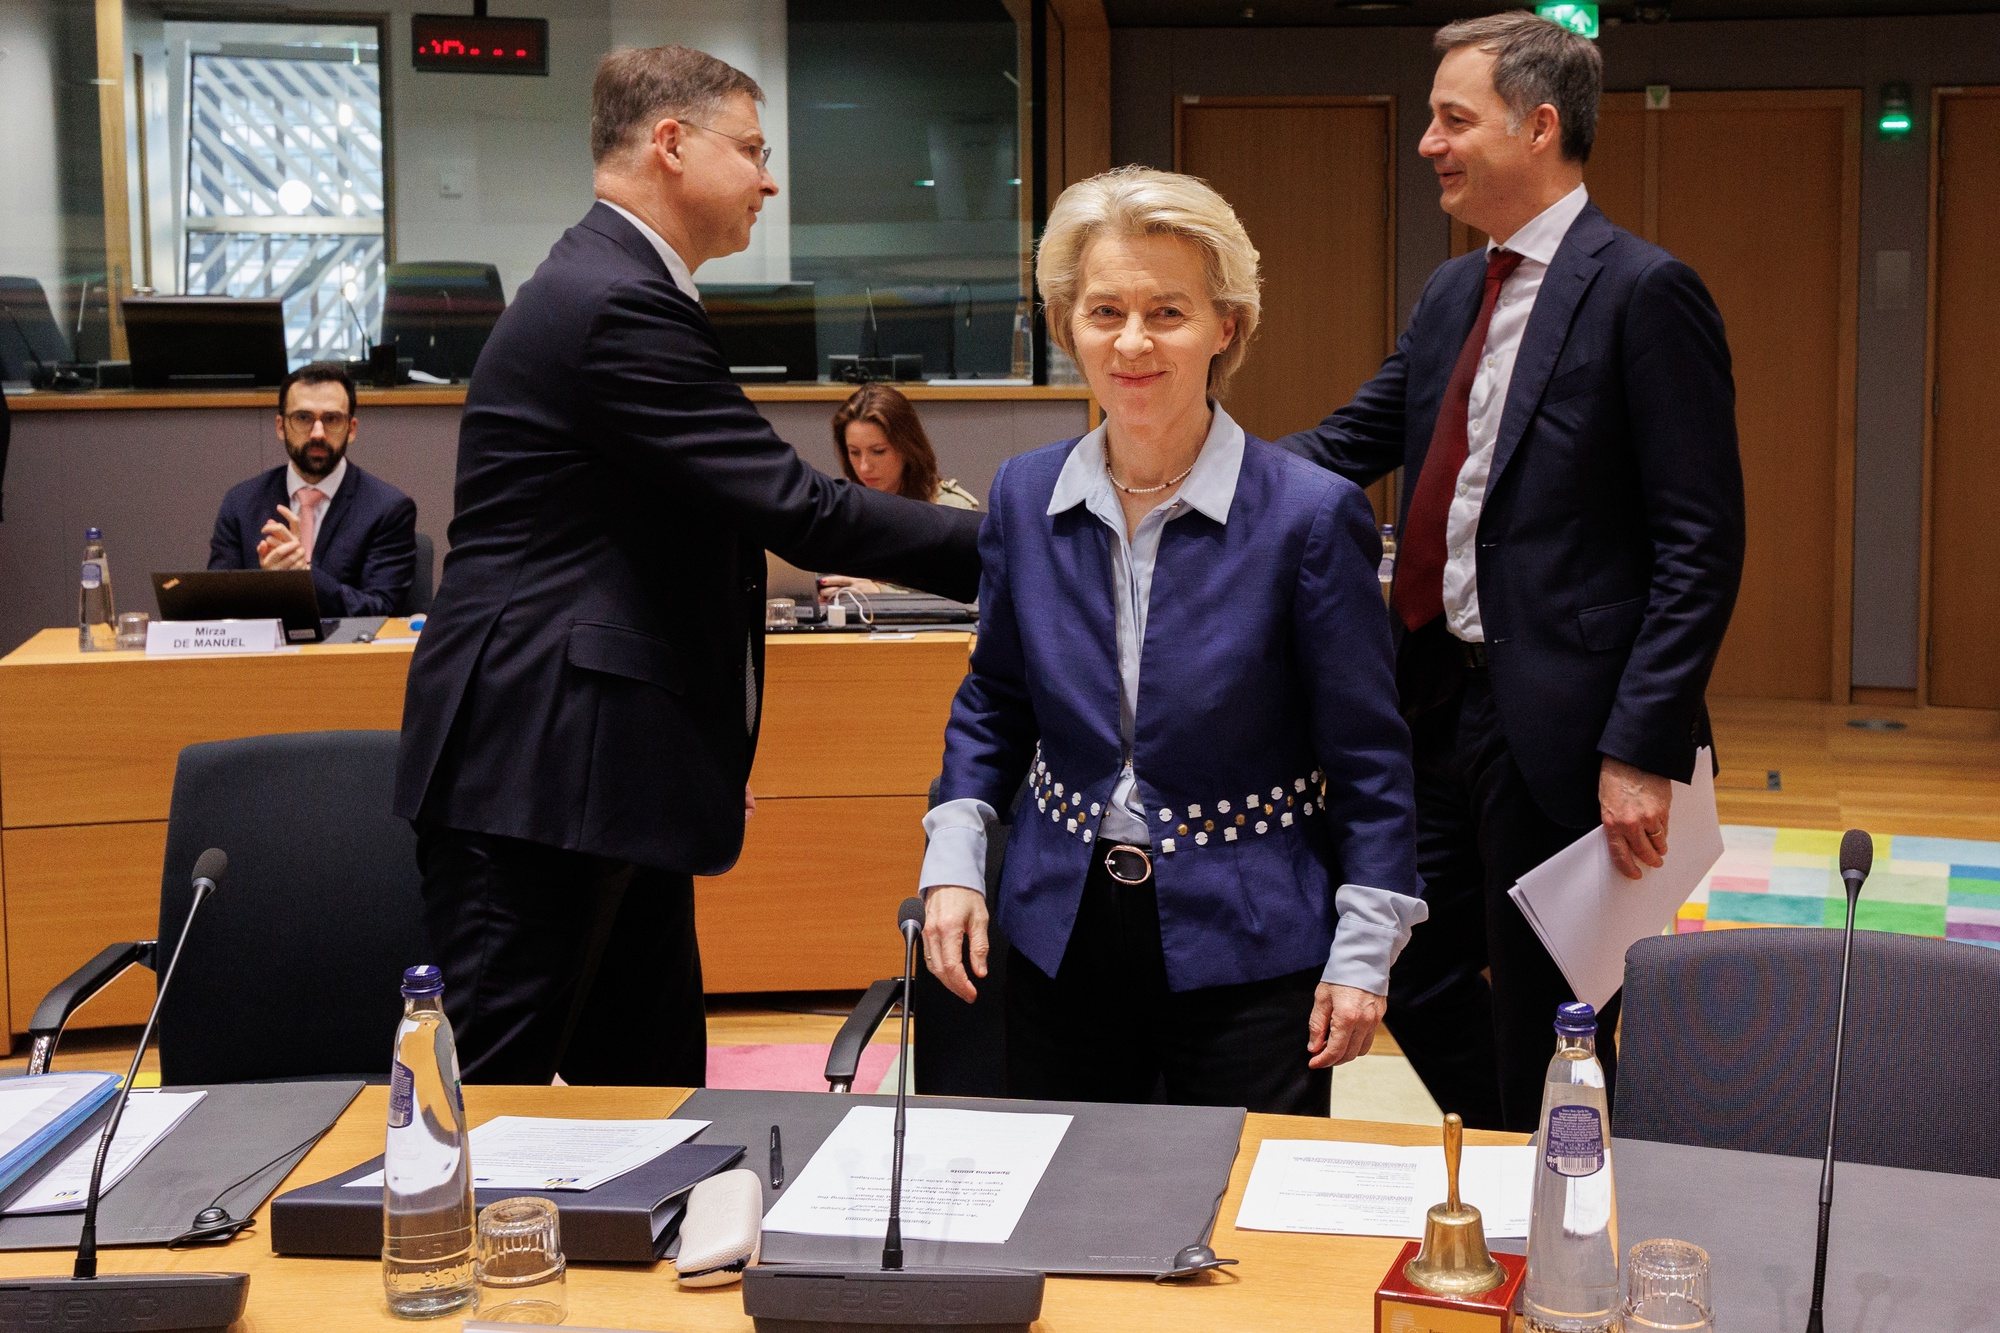 epa11231666 EU Commission Executive Vice-President and Commissioner for An Economy that Works for People, Valdis Dombrovskis (L) shakes hands with Belgian Prime Minister Alexander de Croo as European Commission President Ursula von der Leyen looks on during the Tripartite Social Summit in the European Council in Brussels, Belgium, 20 March 2024. The summit between the EU institutions at presidential level and the European social partners at top management level will focus on &quot;An economically and socially strong Europe to play its role in the world&quot;. Participants will discuss an industrial strategy to complement the Green Deal, with quality jobs at its core, a single market that works for businesses and workers, and tackling skills and labor shortages.  EPA/OLIVIER MATTHYS